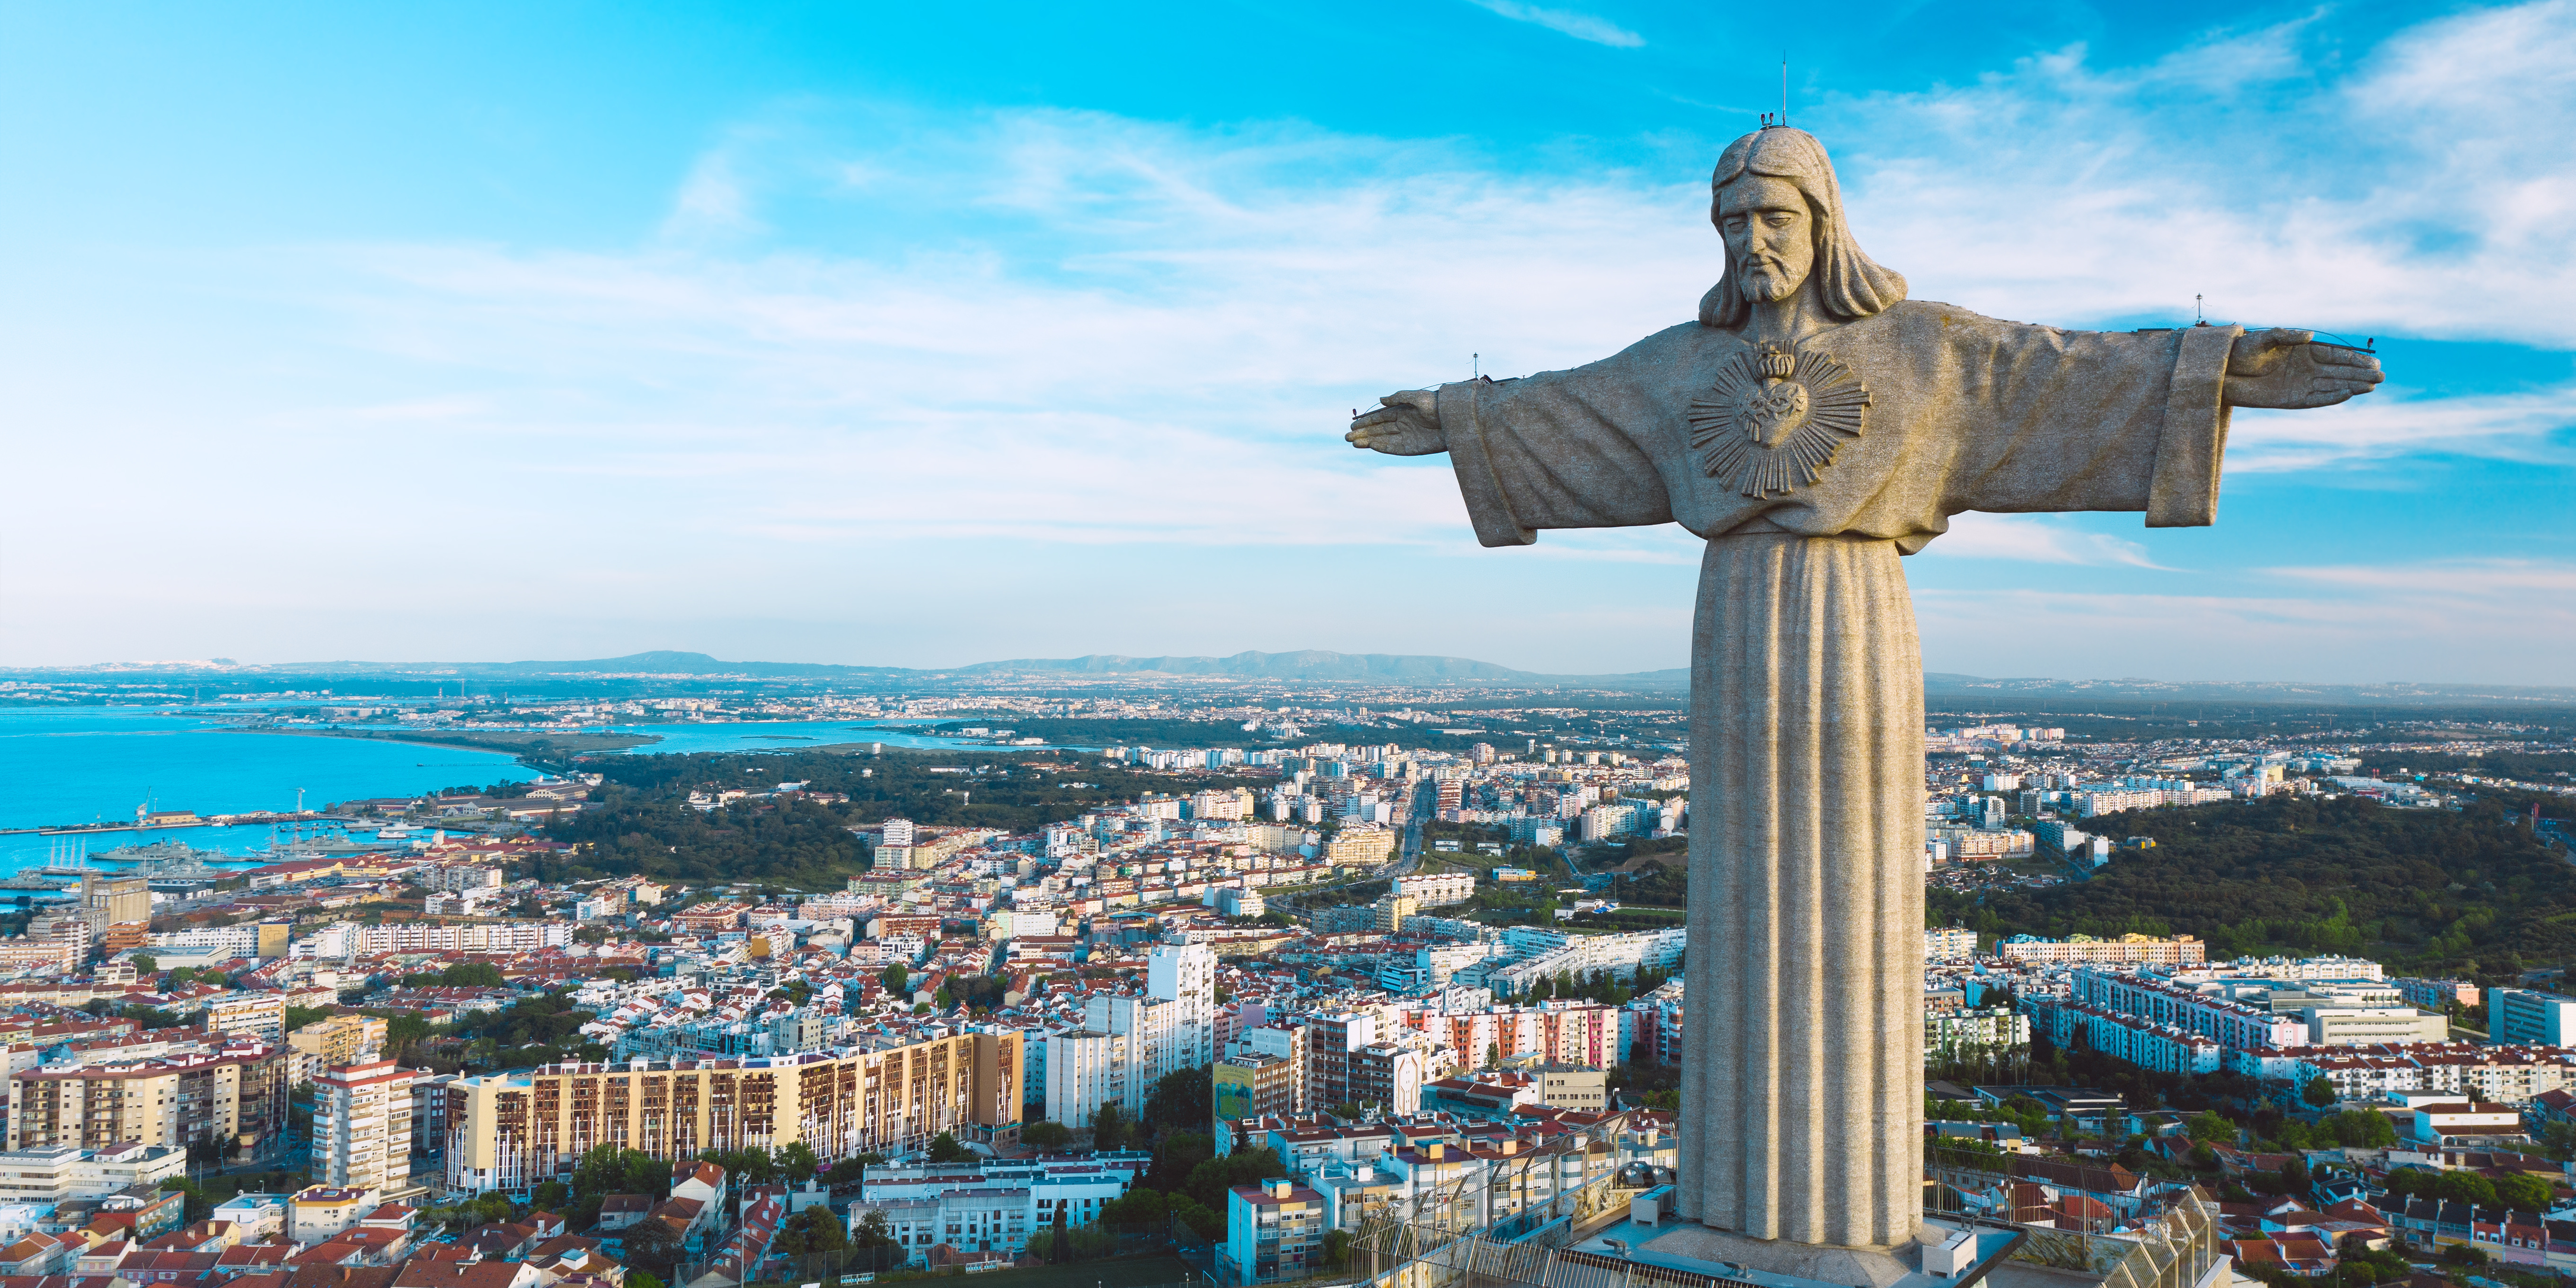 Must-see Religious Locations in Portugal